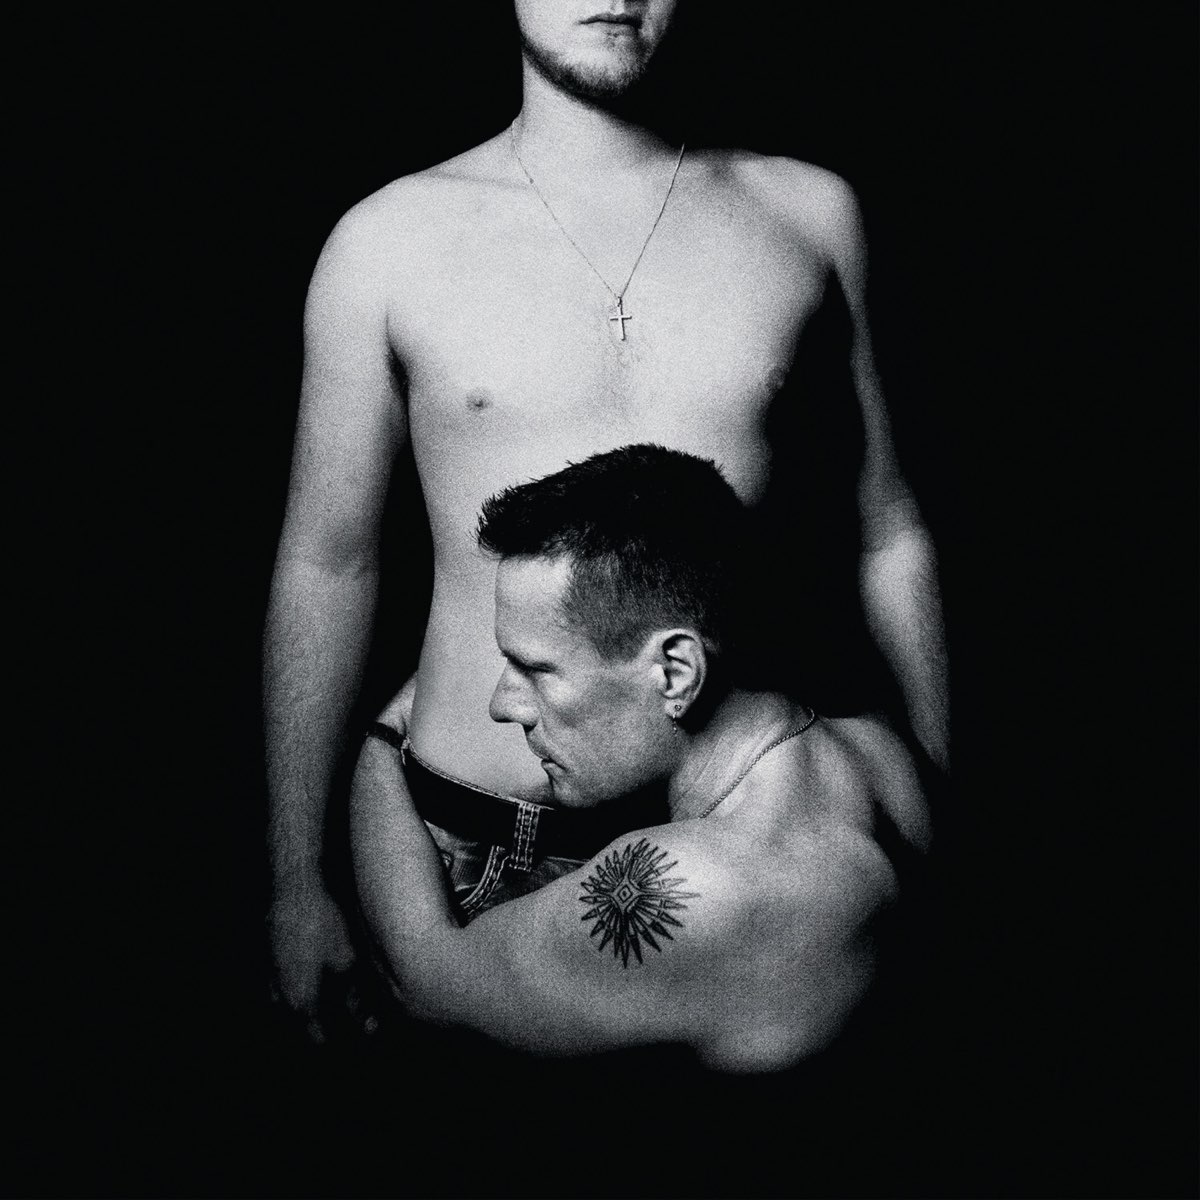 “In 2014, Apple automatically added U2's new Songs of Innocence album to the libraries of every iTunes customer for free -- more than 500 million customers. If you had an auto-downloads enabled on your iTunes, the album was automatically downloaded to your devices. People hated this. As a result, Apple created a webpage dedicated to deleting the album from people's accounts.” —u/MaterialPace8831